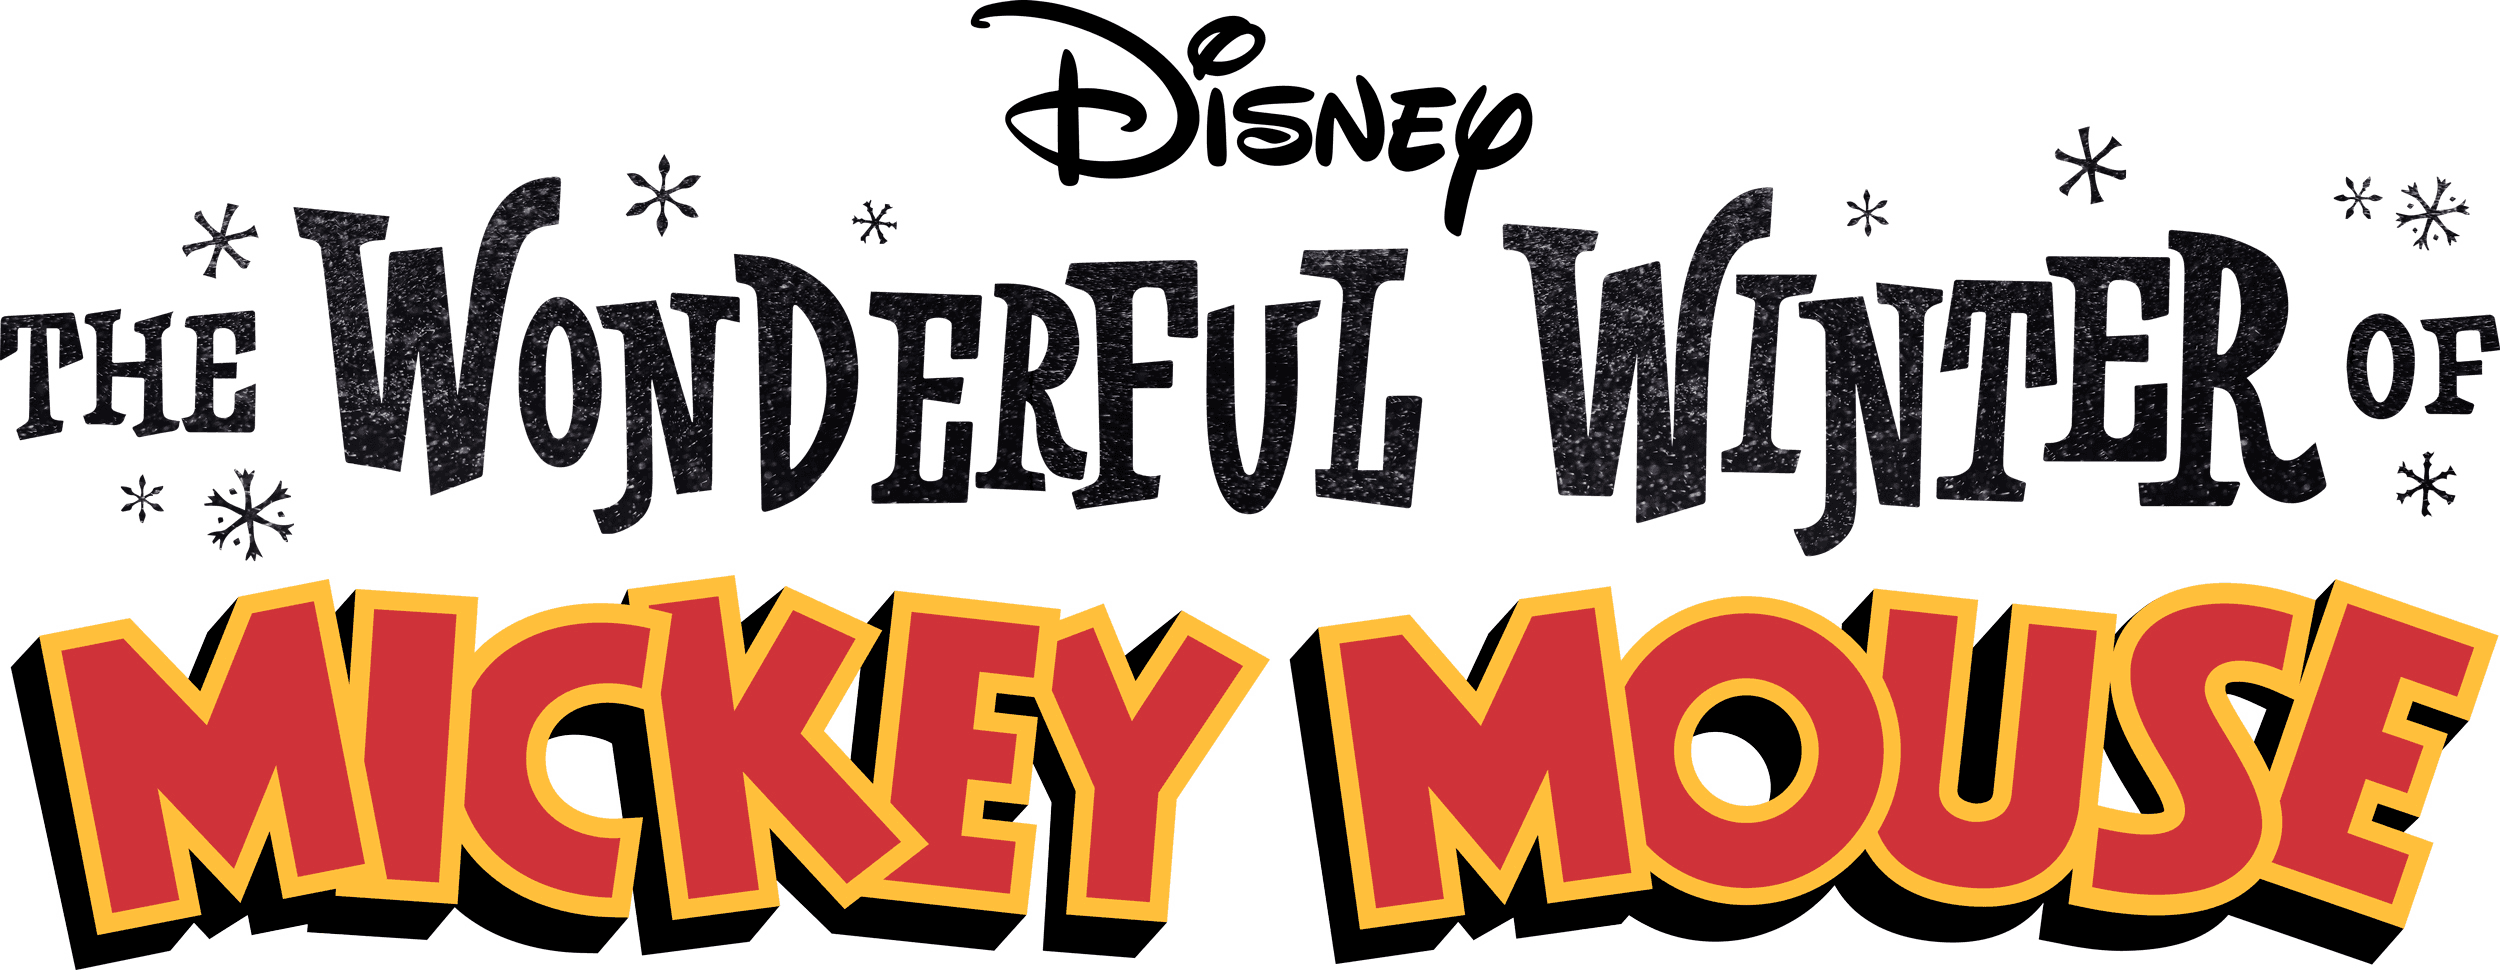 The Wonderful Winter of Mickey Mouse logo